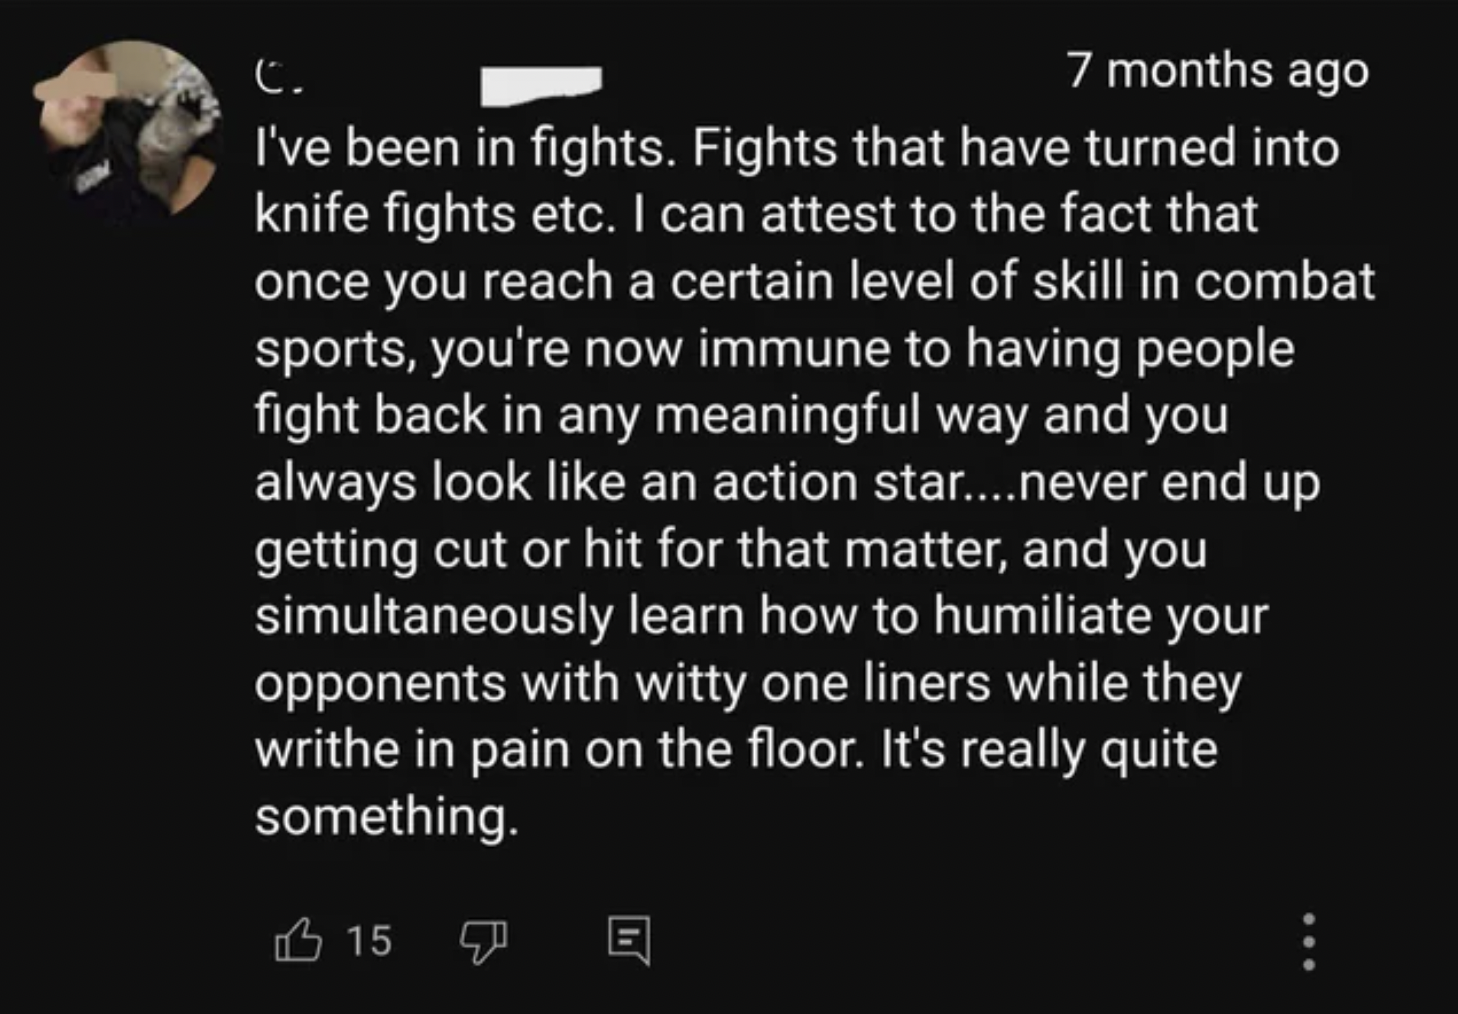 C. 7 months ago I've been in fights. Fights that have turned into knife fights etc. I can attest to the fact that once you reach a certain level of skill in combat sports, you're now immune to having people fight back in any meaningful way